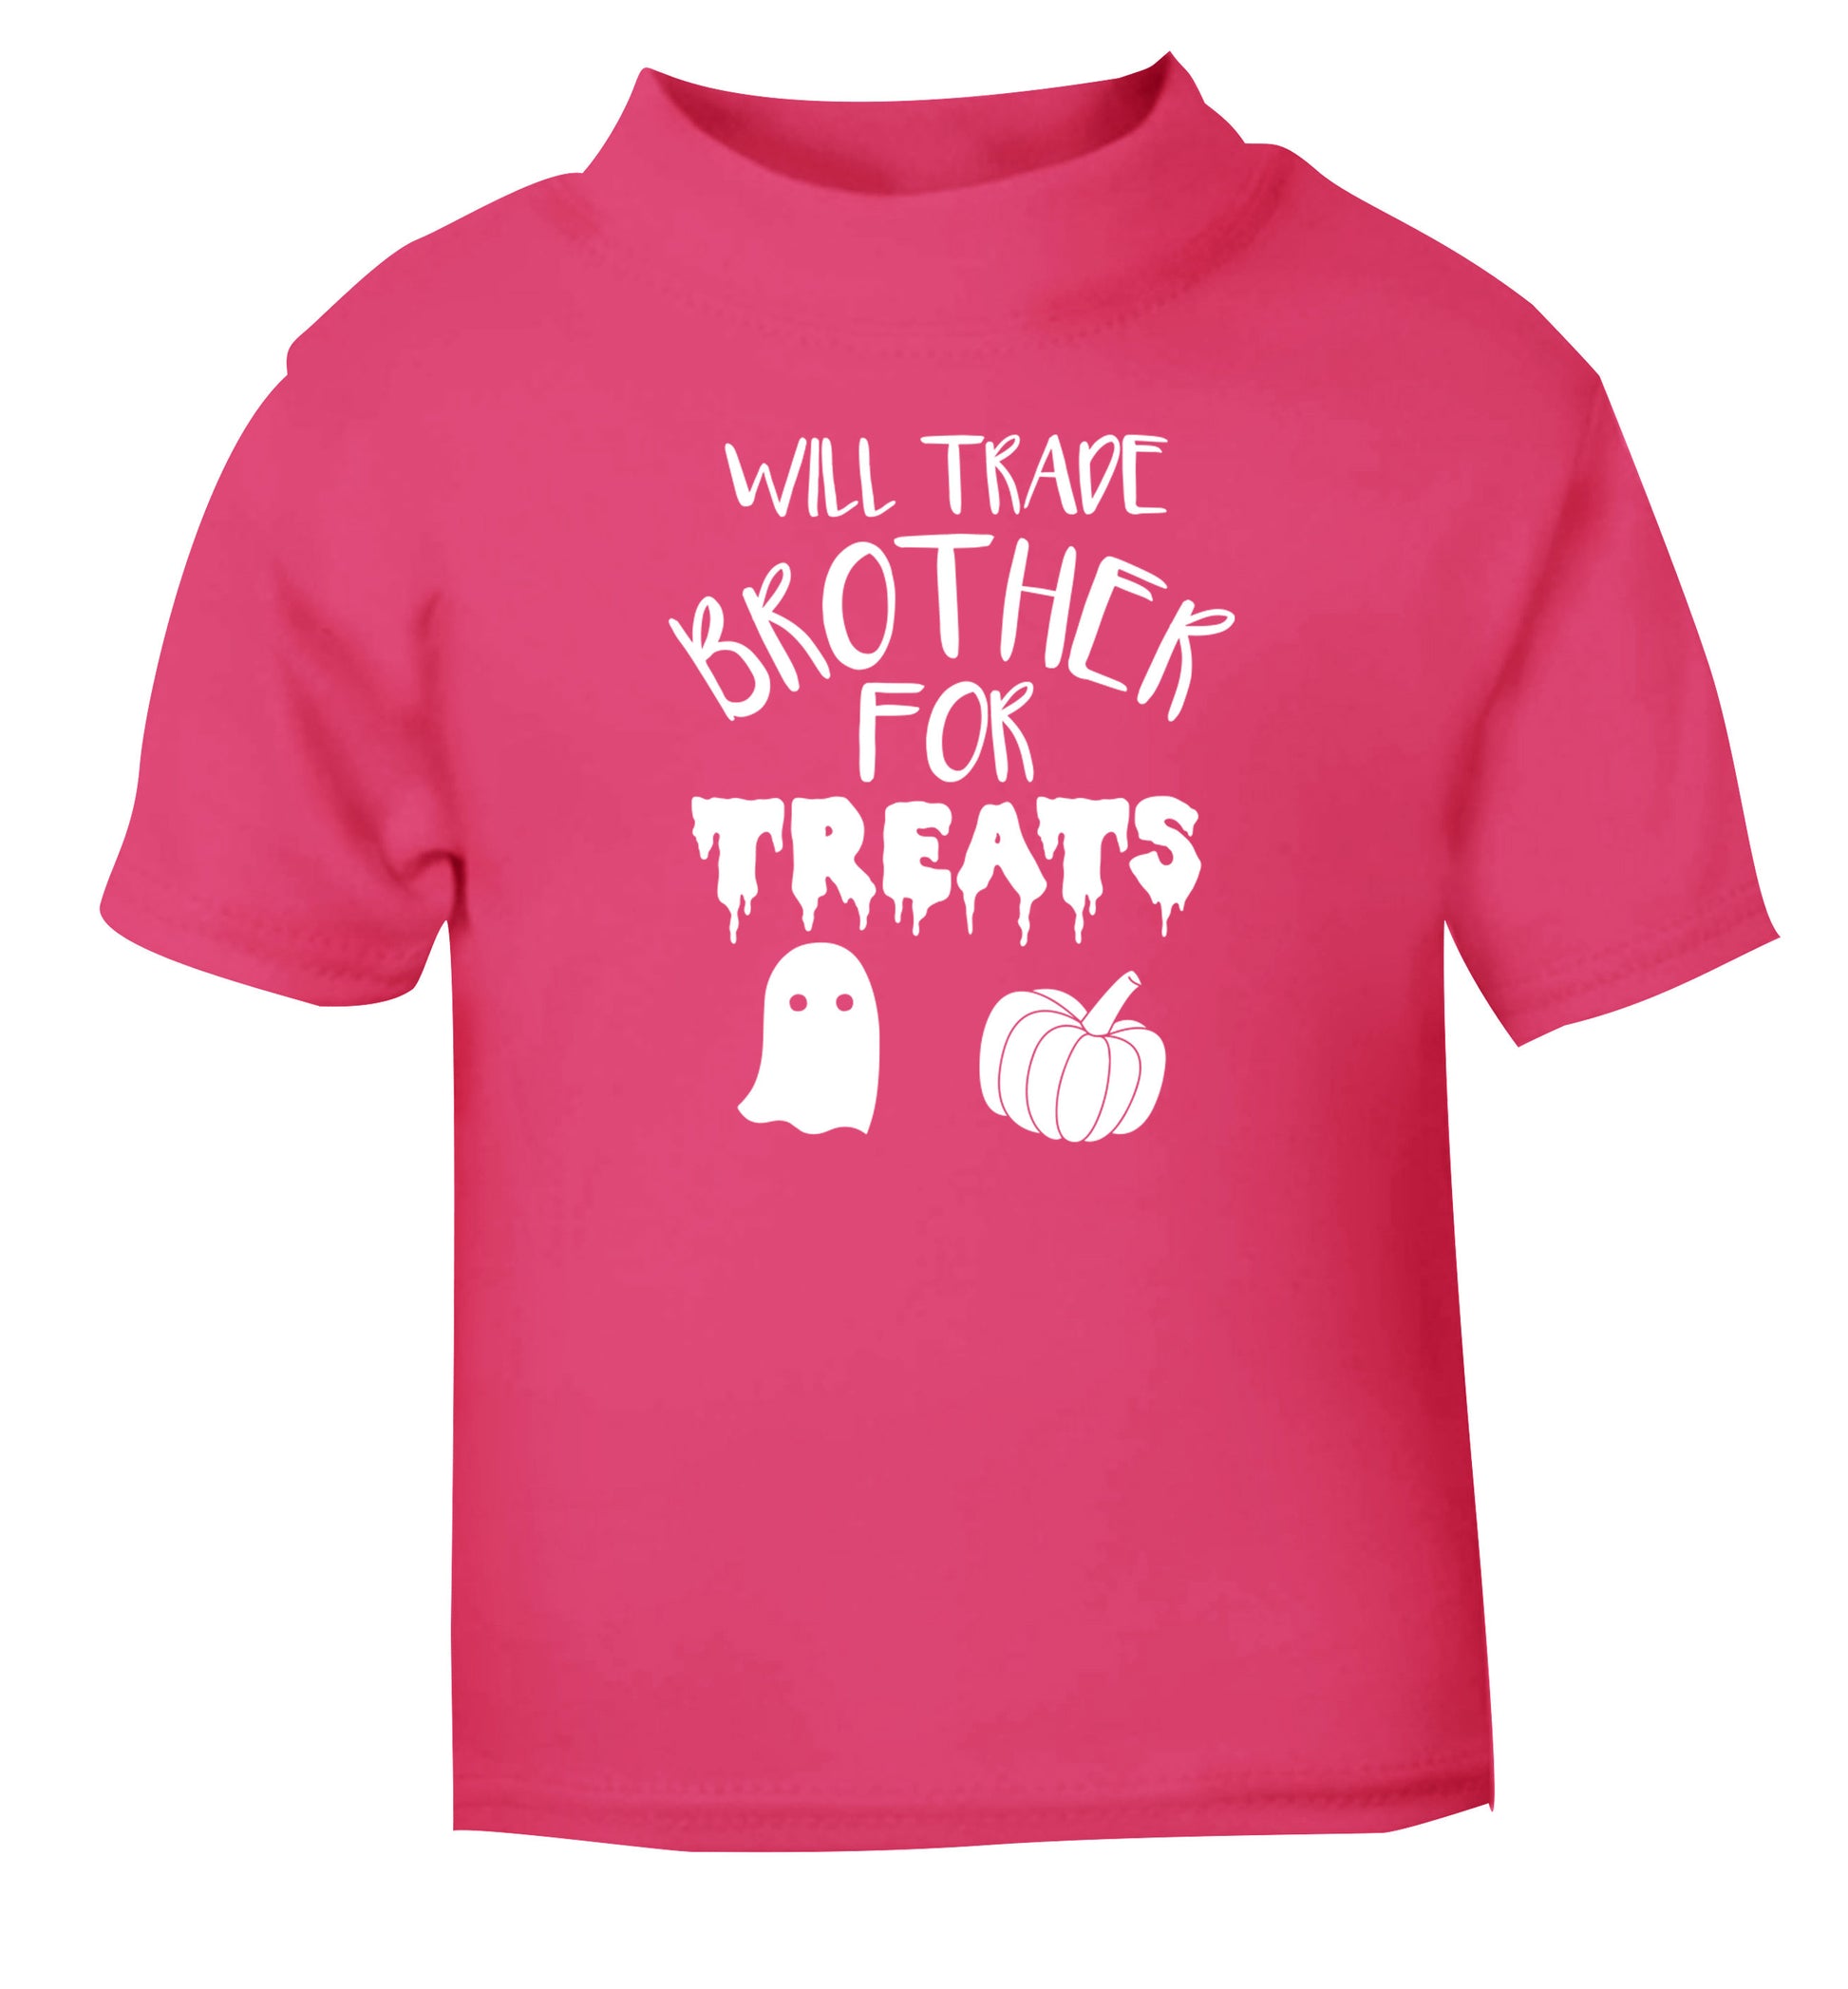 Will trade brother for treats pink Baby Toddler Tshirt 2 Years